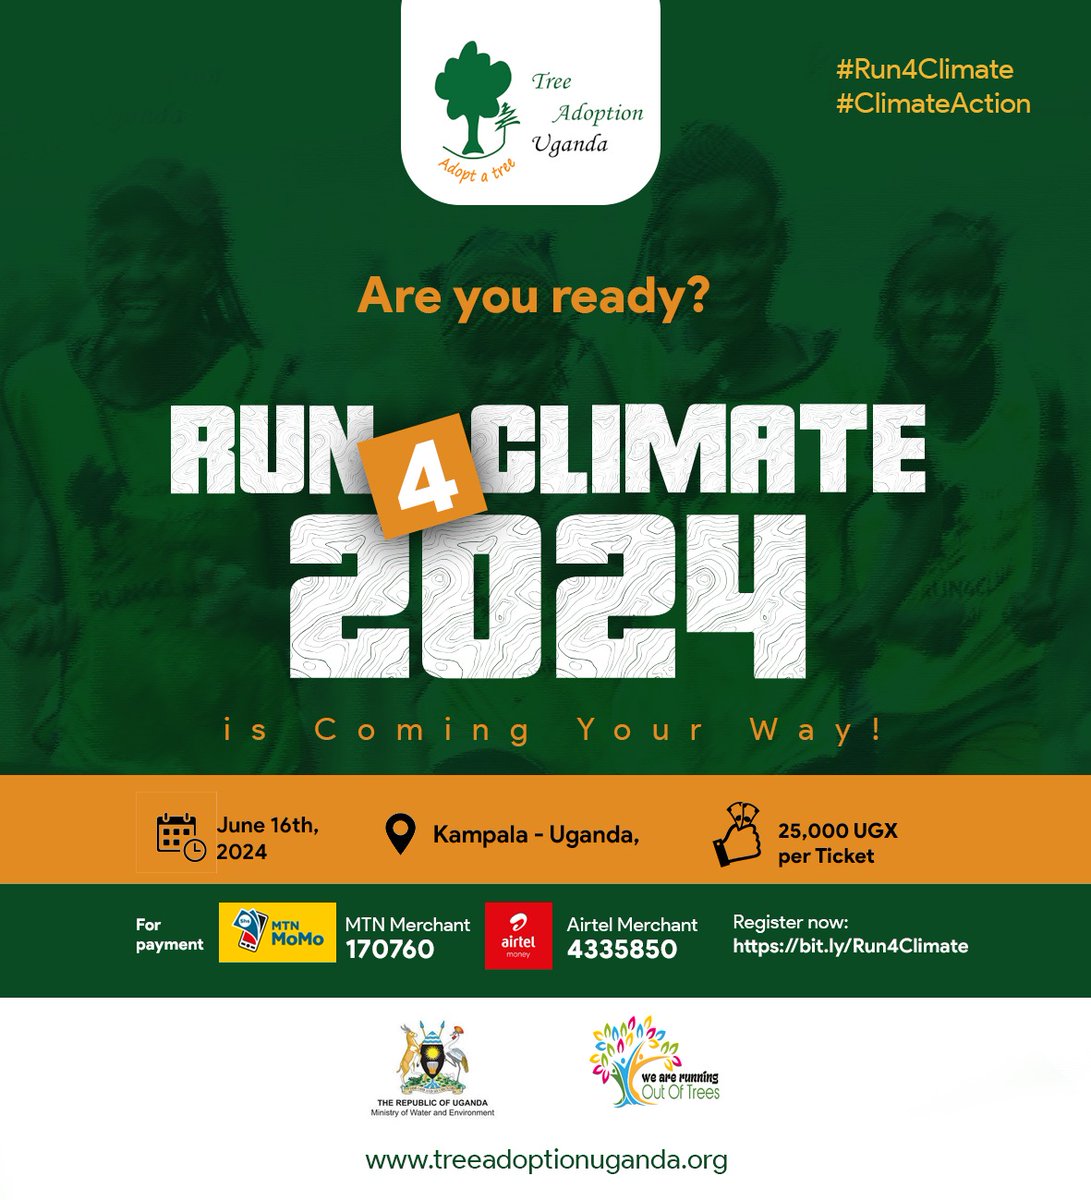 🌳🏃‍♀️🏃‍♂️Get ready to #Run4Climate on June 16th in Kampala! Join @tree_adoptionug for this climate action event to raise funds for tree planting. To participate in #Run4Climate, register here 📲: bit.ly/Run4Climate #ClimateAction